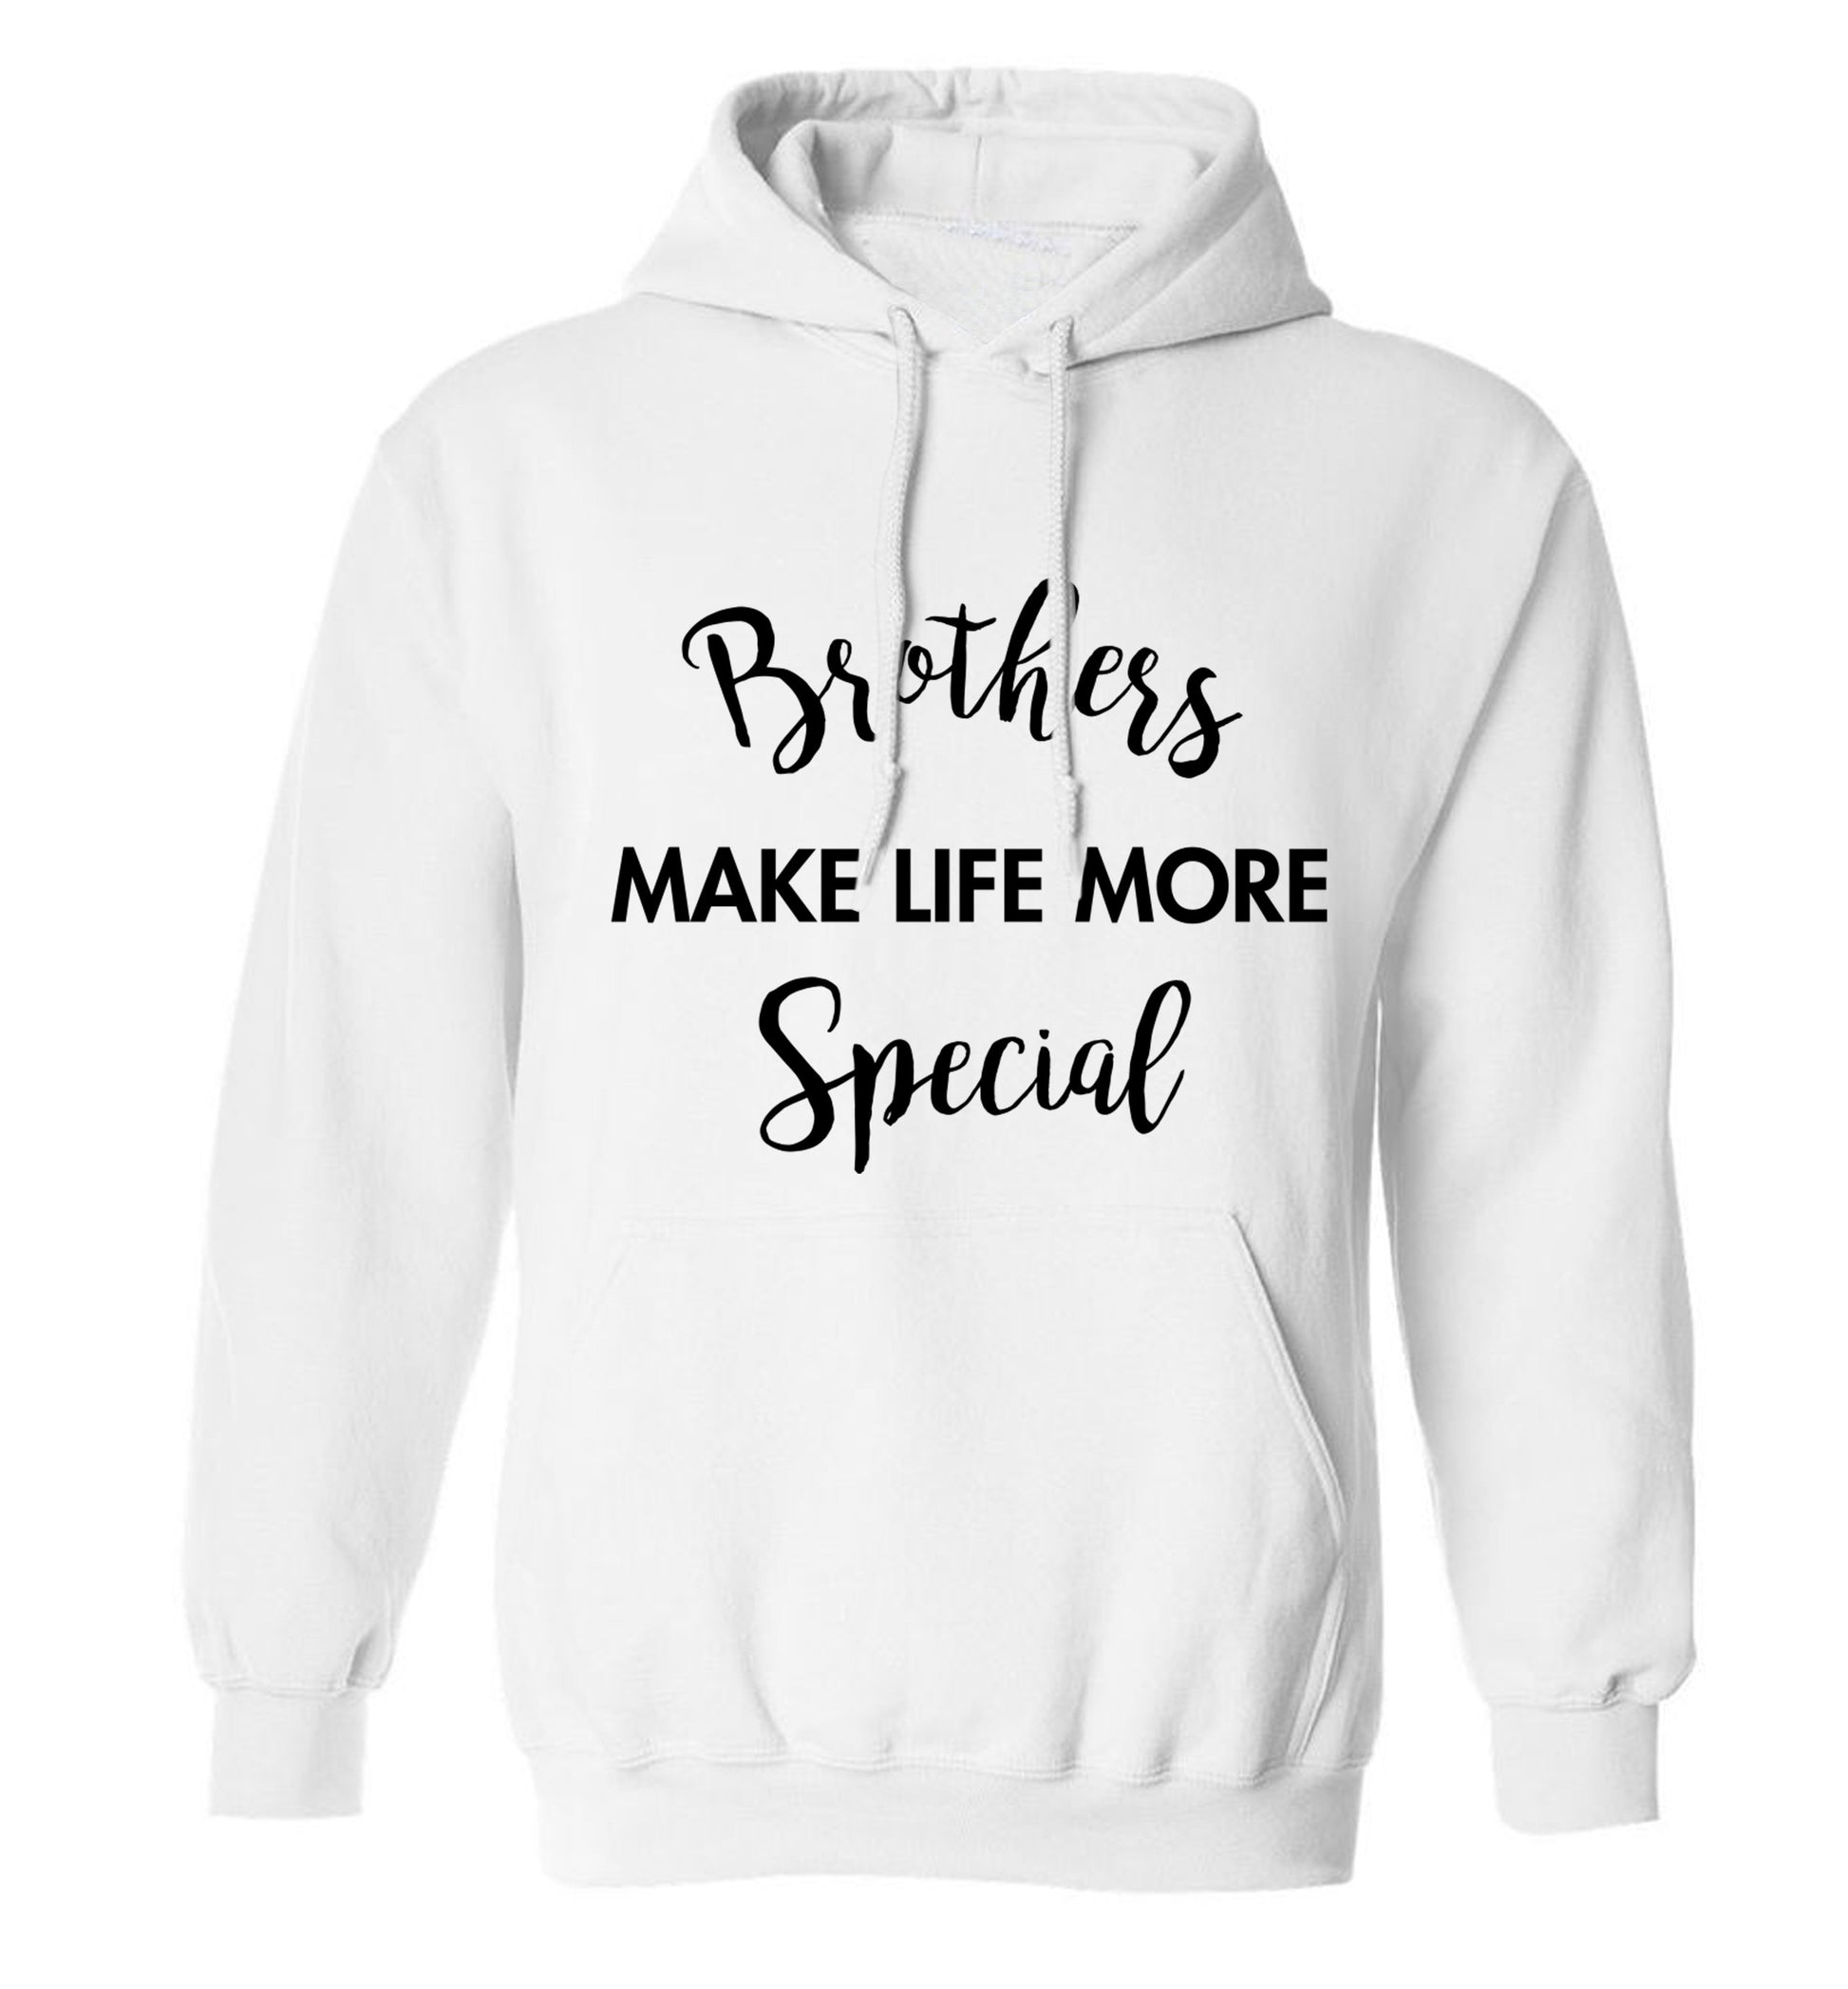 Brothers make life more special adults unisex white hoodie 2XL